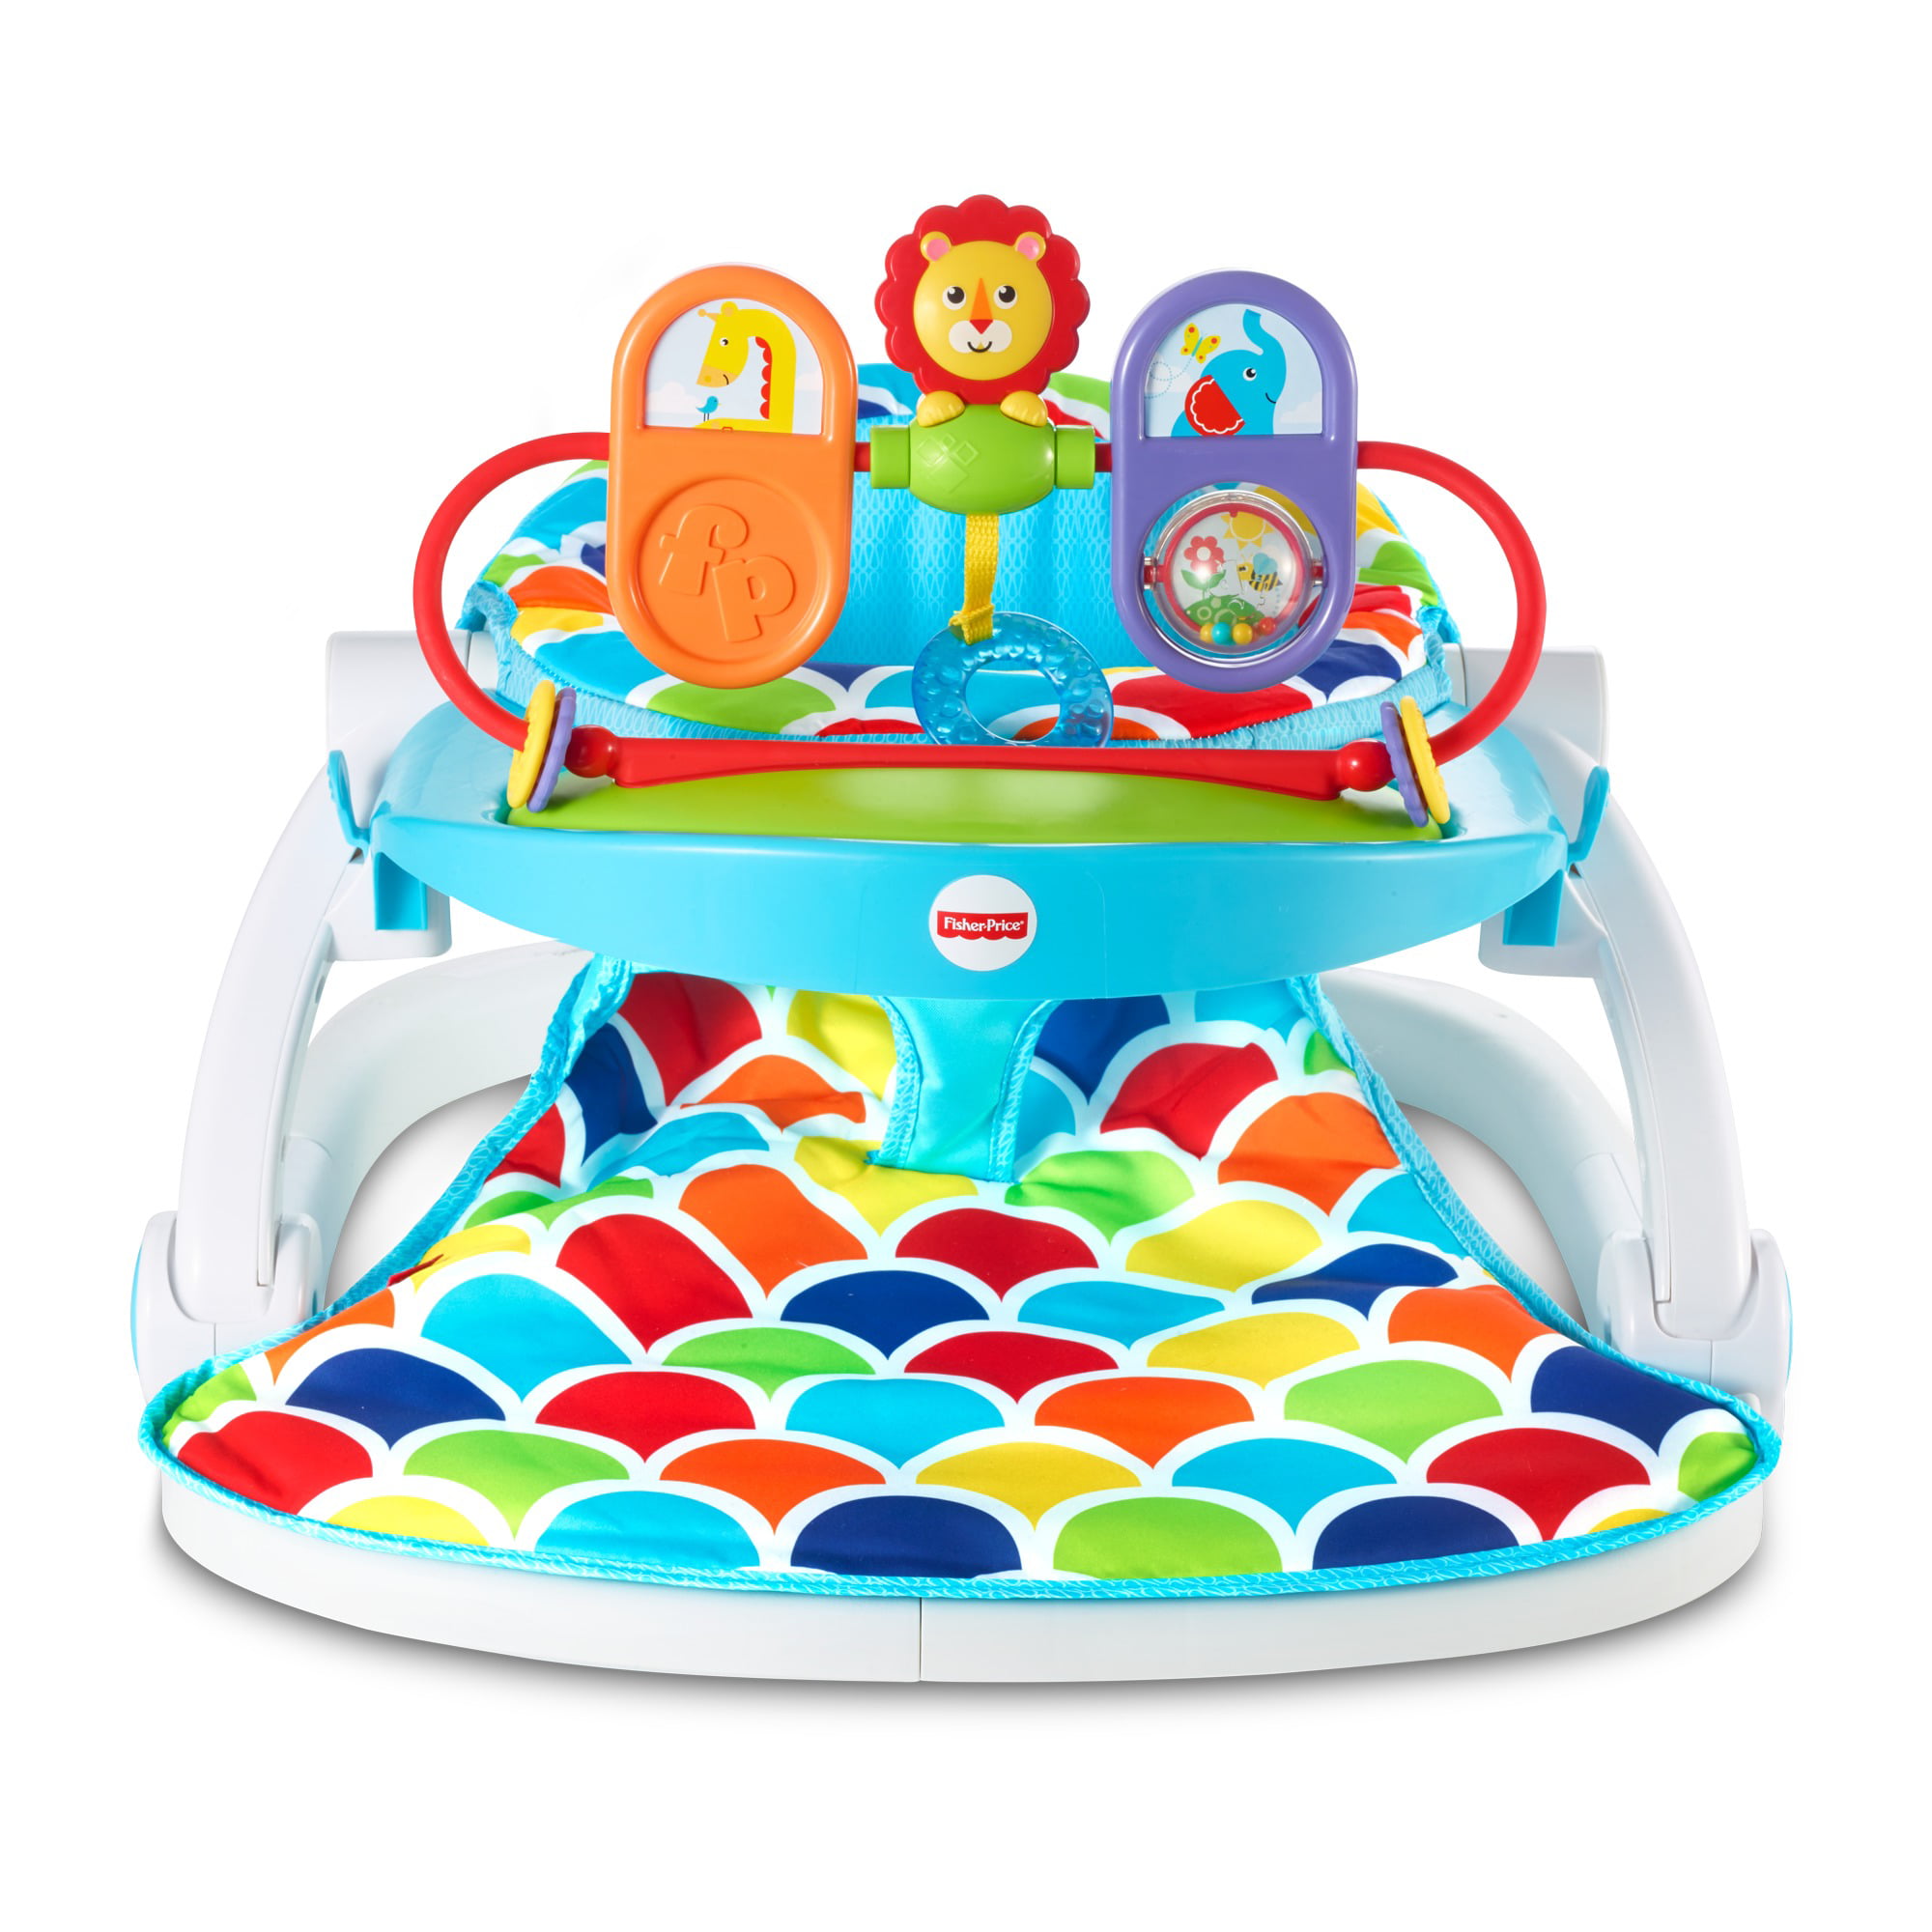 FisherPrice Deluxe SitMeUp Floor Seat with Toy Tray